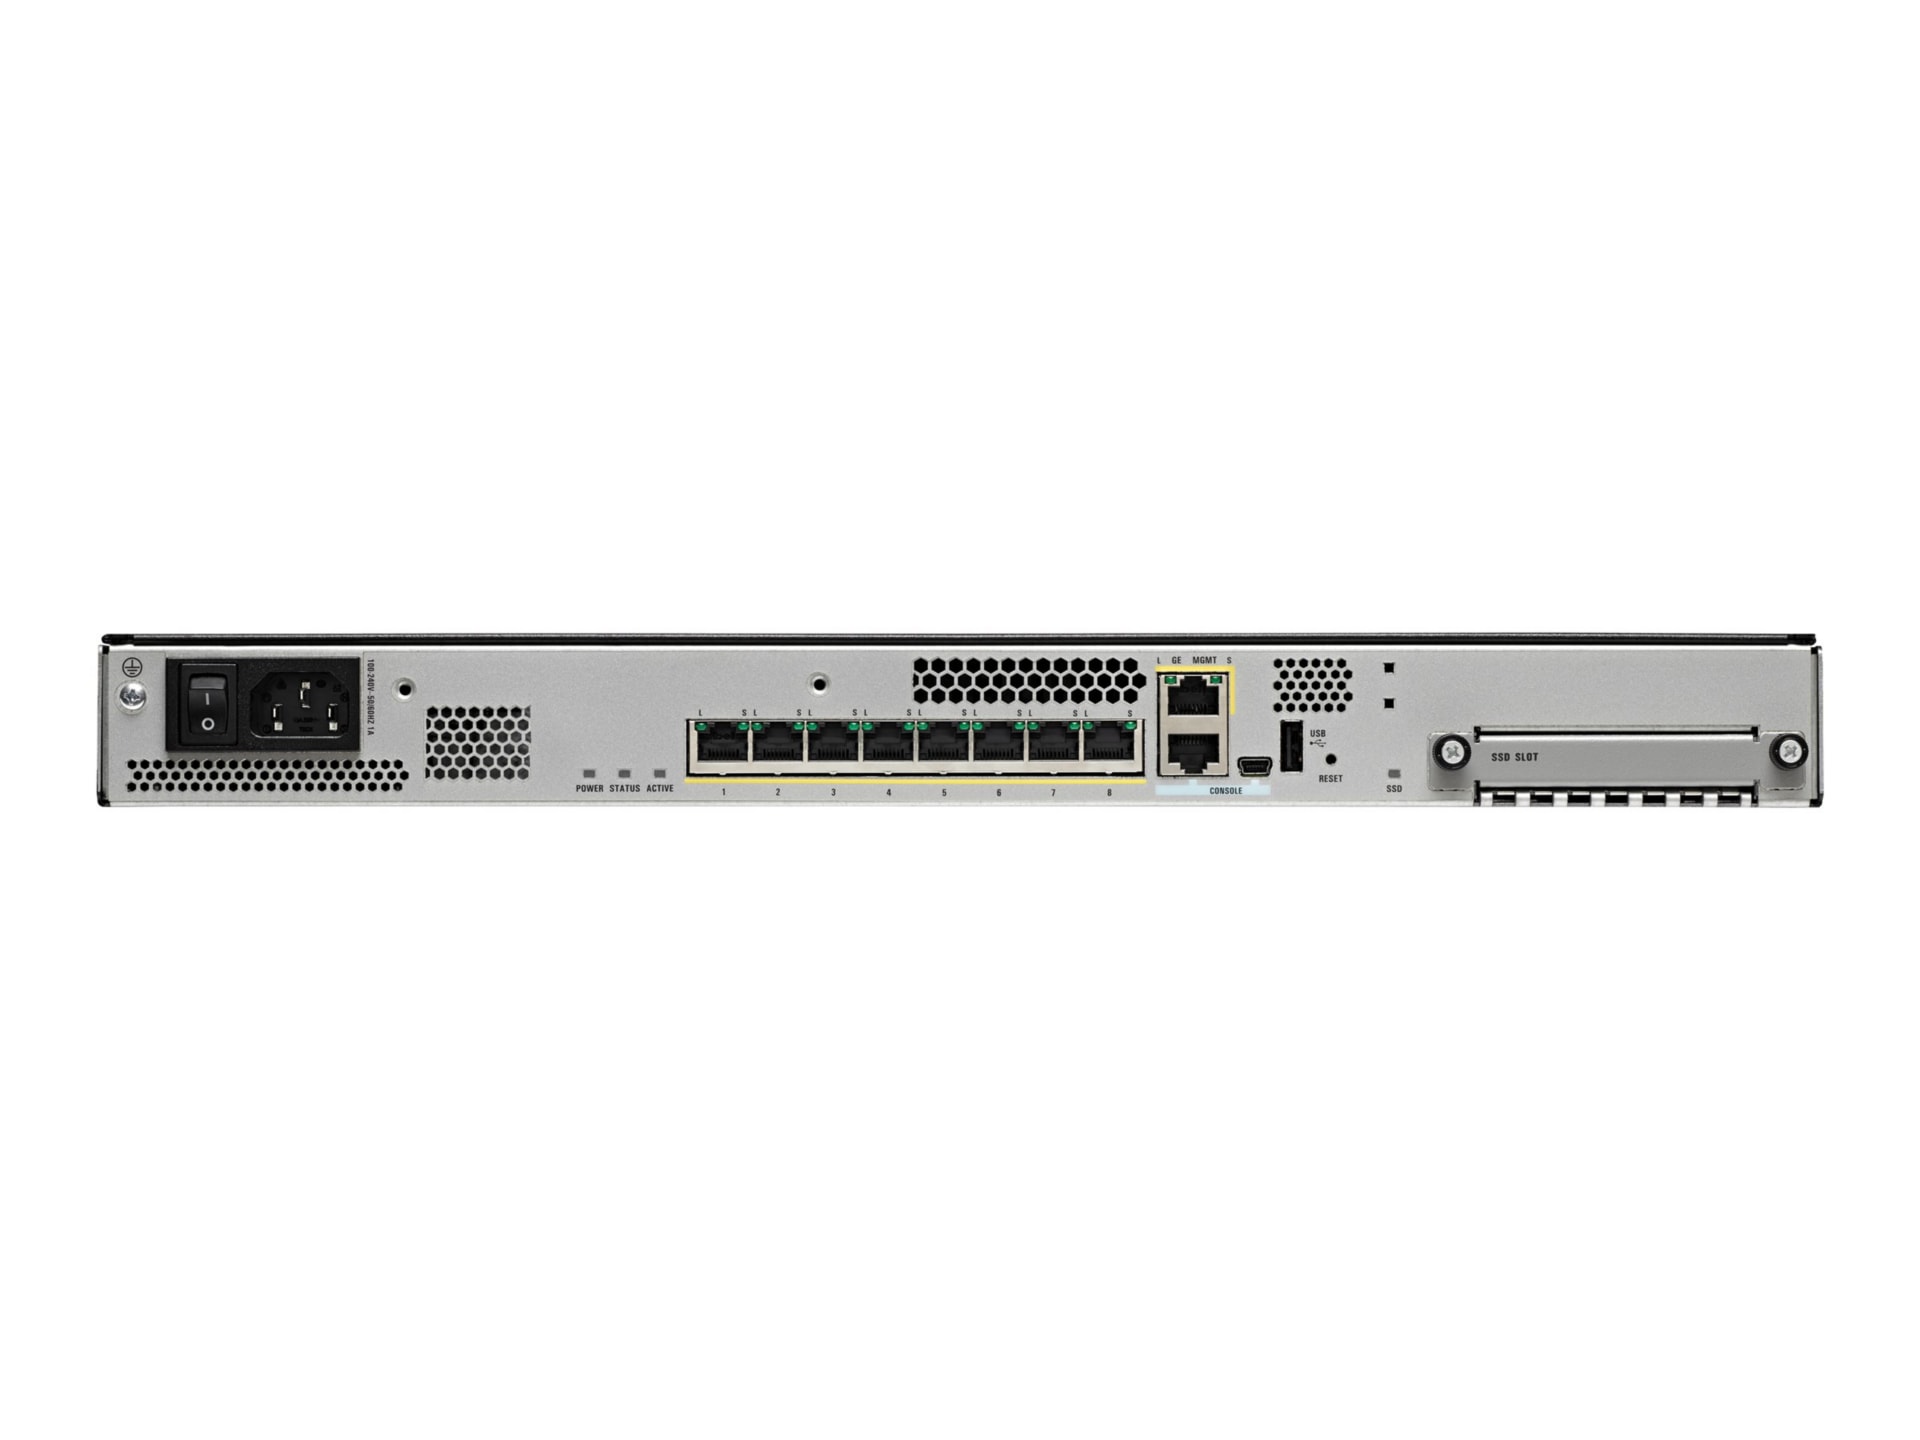 Cisco ASA 5508-X with FirePOWER Services - security appliance